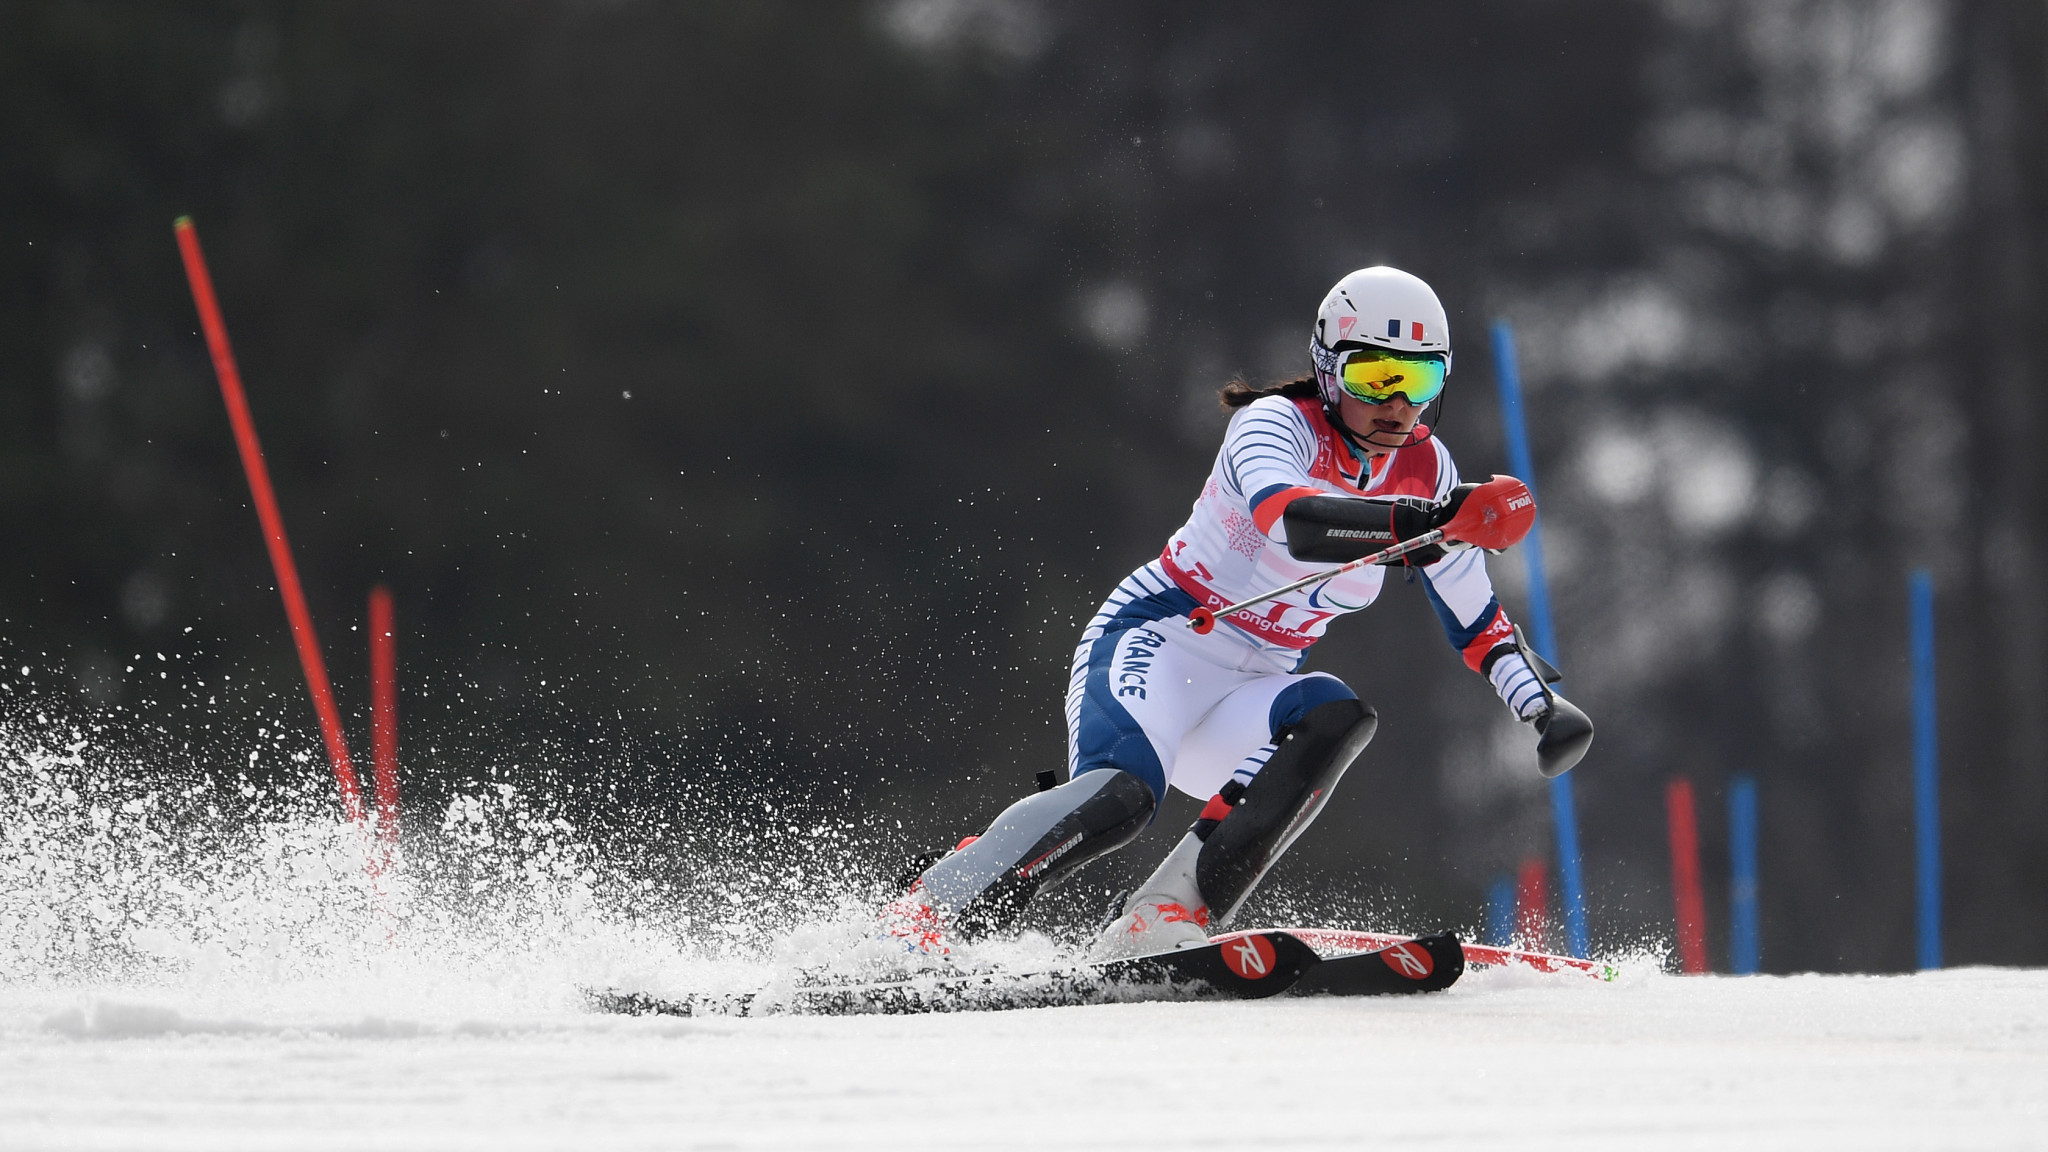 Eight-time Paralympic champion Marie Bochet had to settle for second place today ©Getty Images